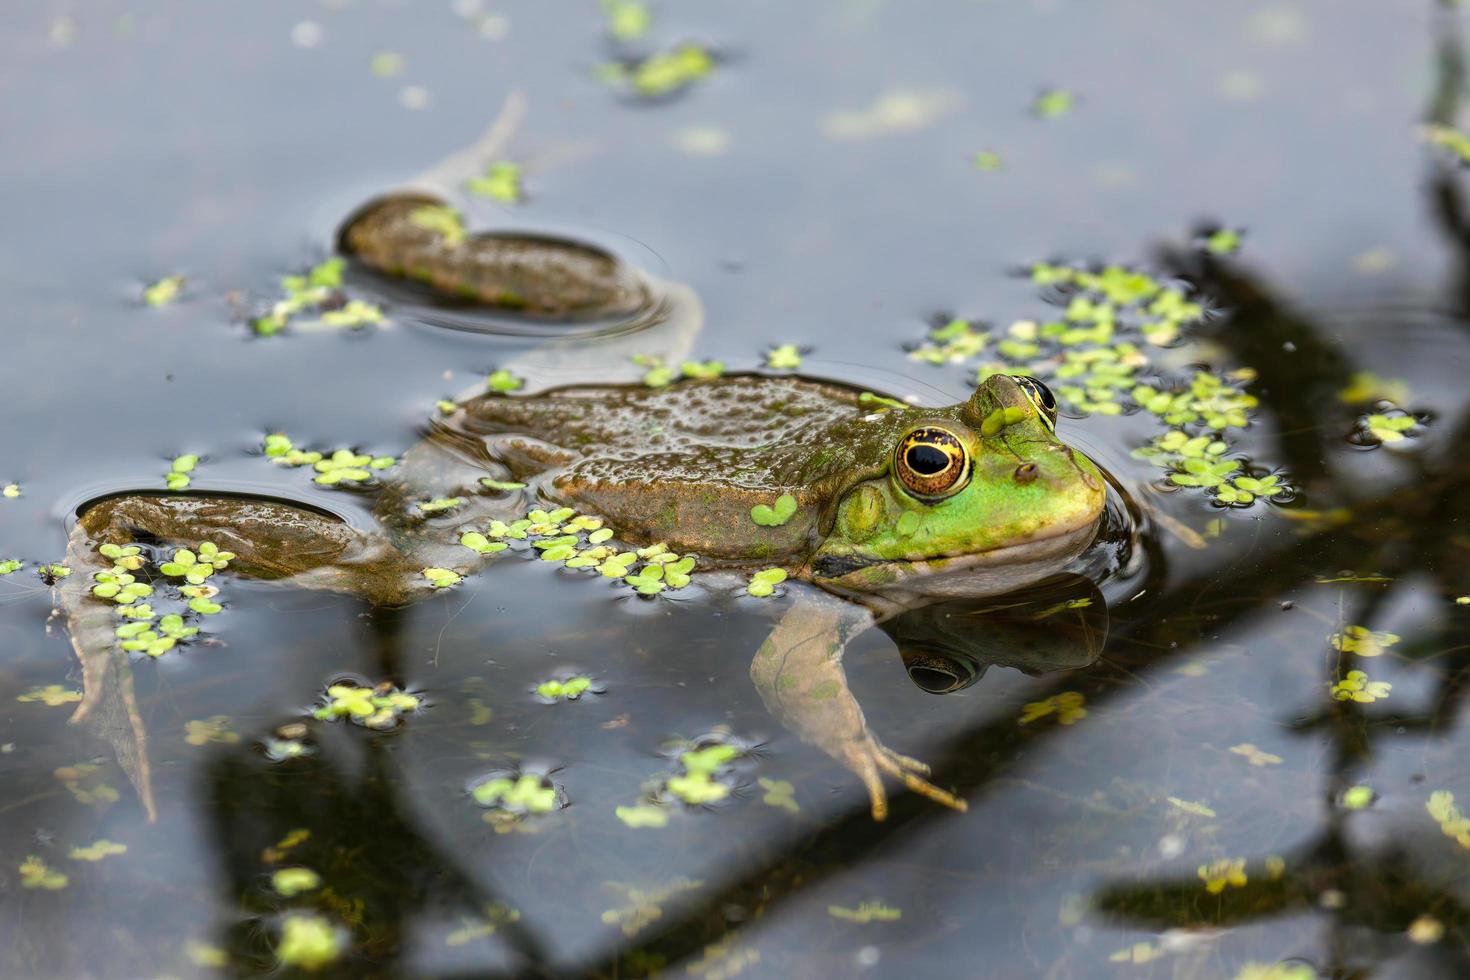 Marsh Frog floating in the pond photo